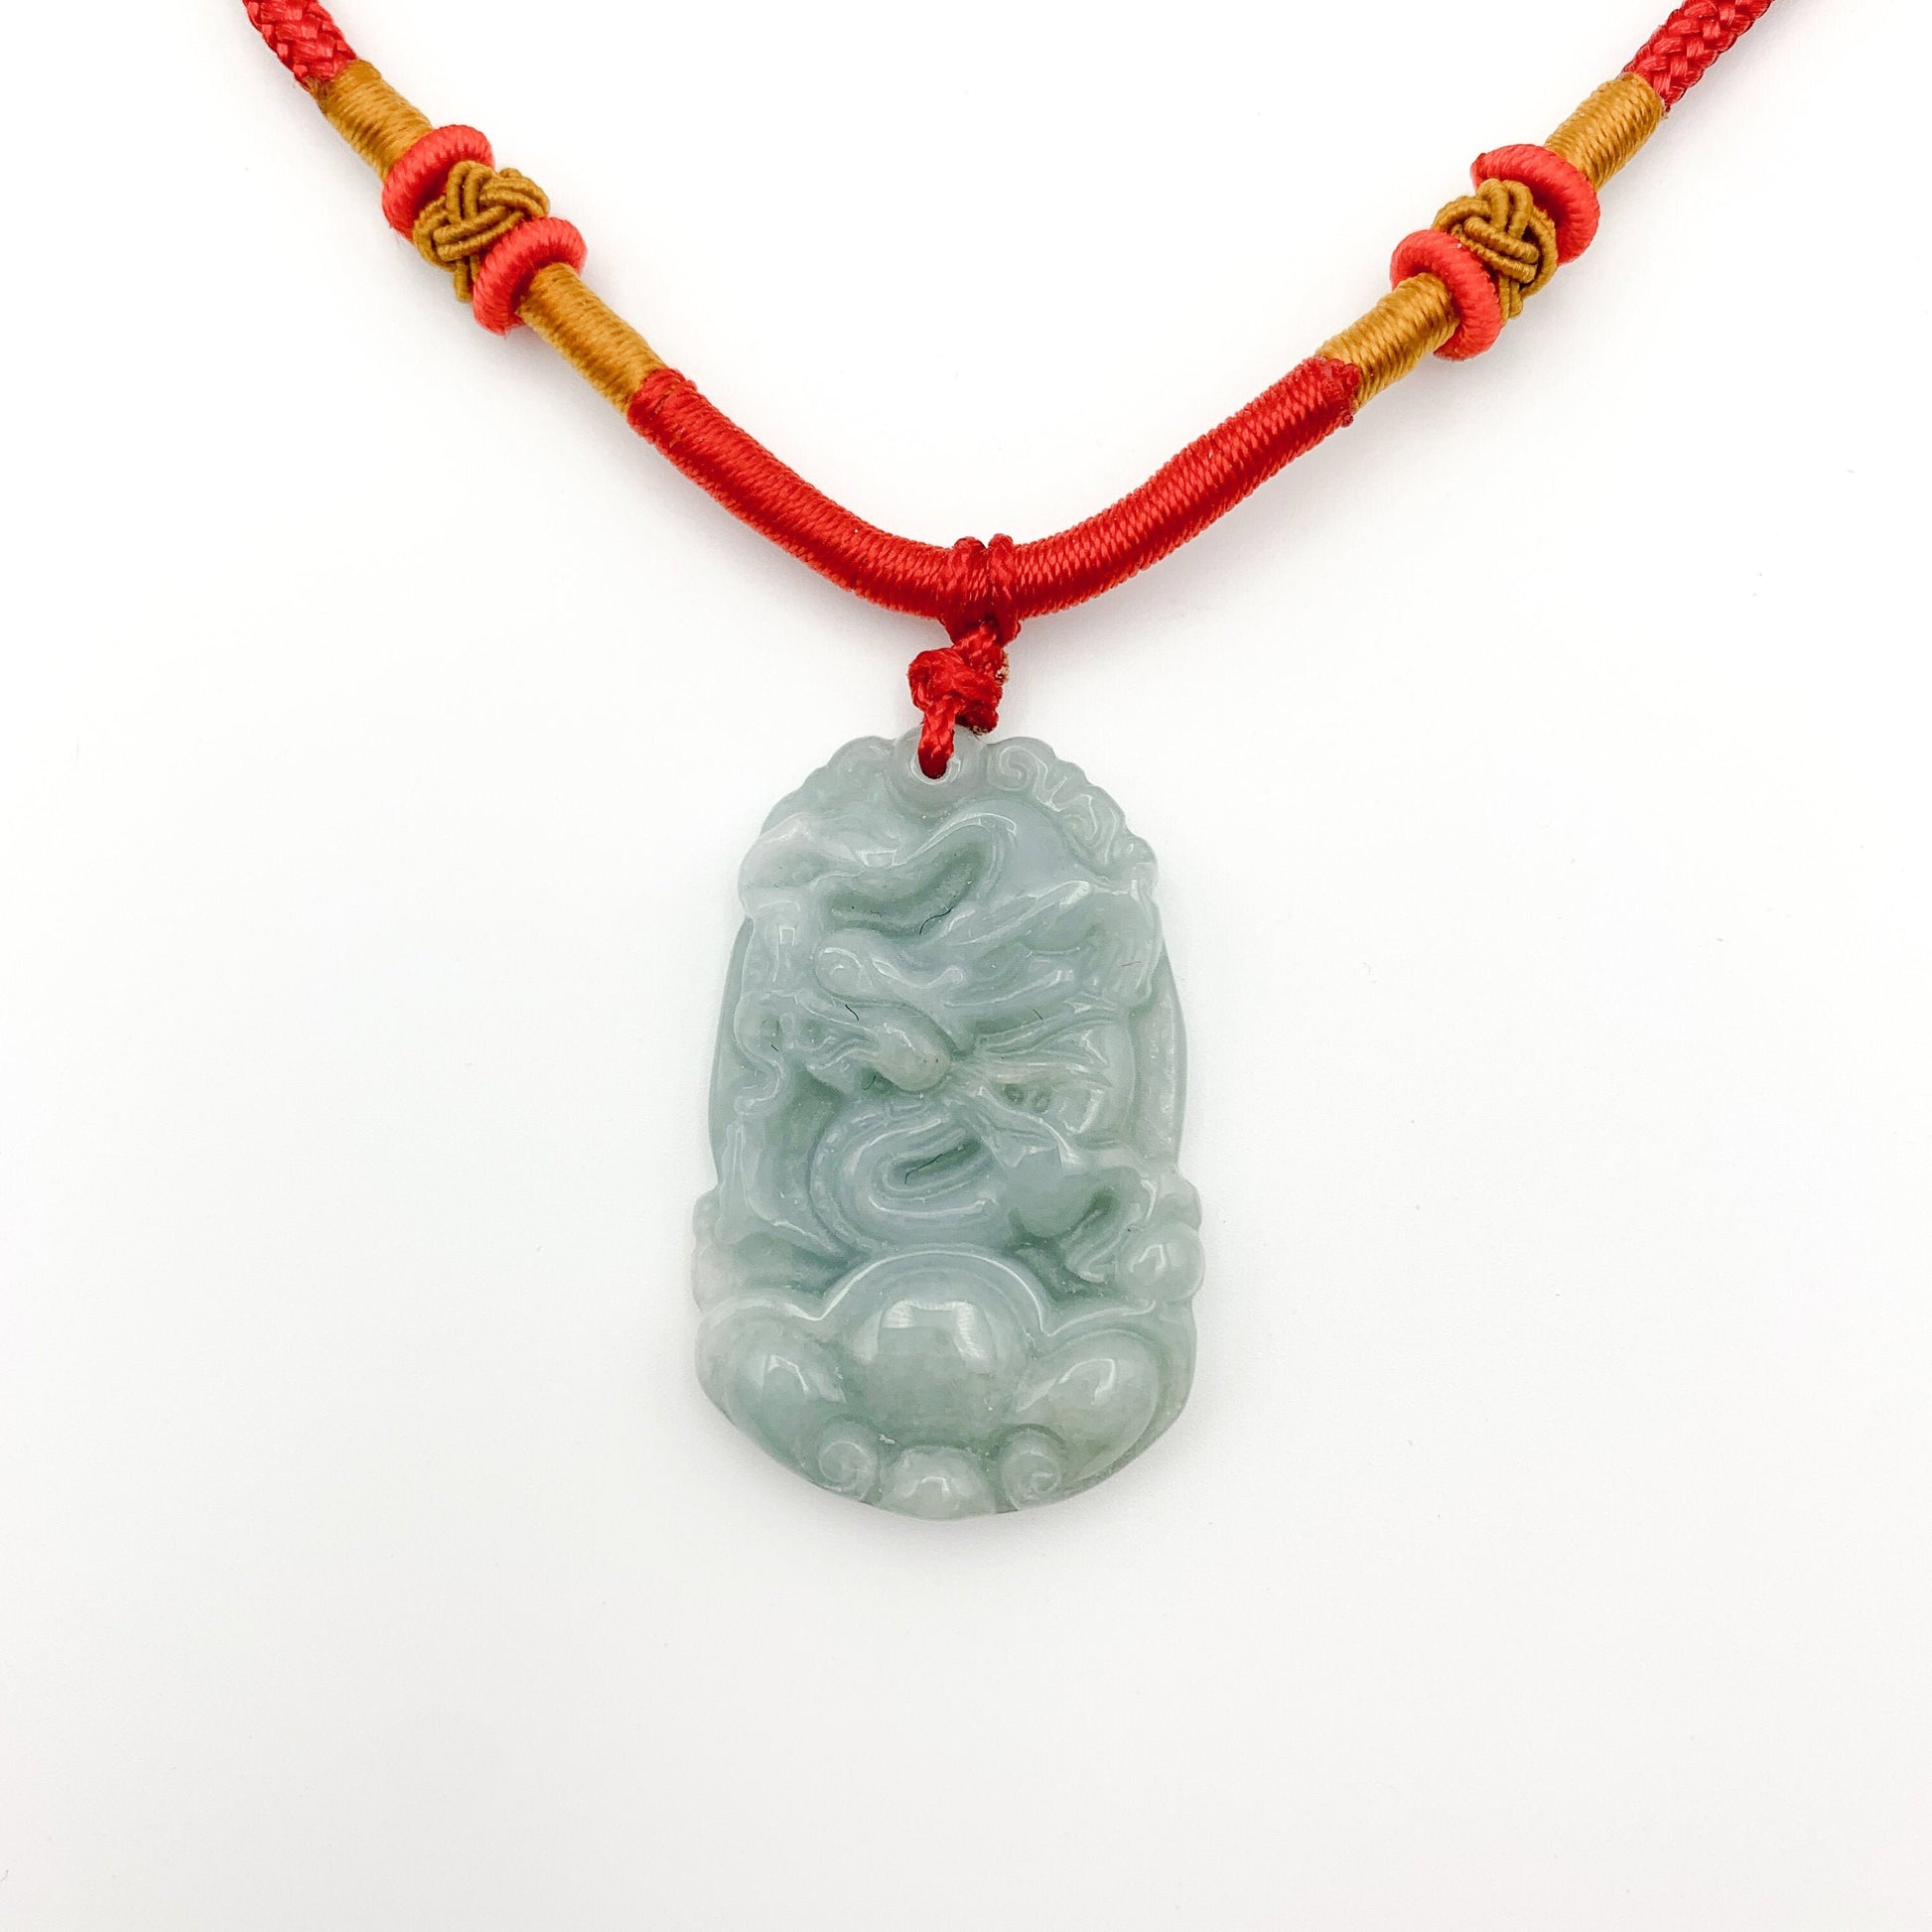 Jadeite Jade Dragon Chinese Zodiac Carved Pendant Necklace, YW-0110-1646545905 - AriaDesignCollection